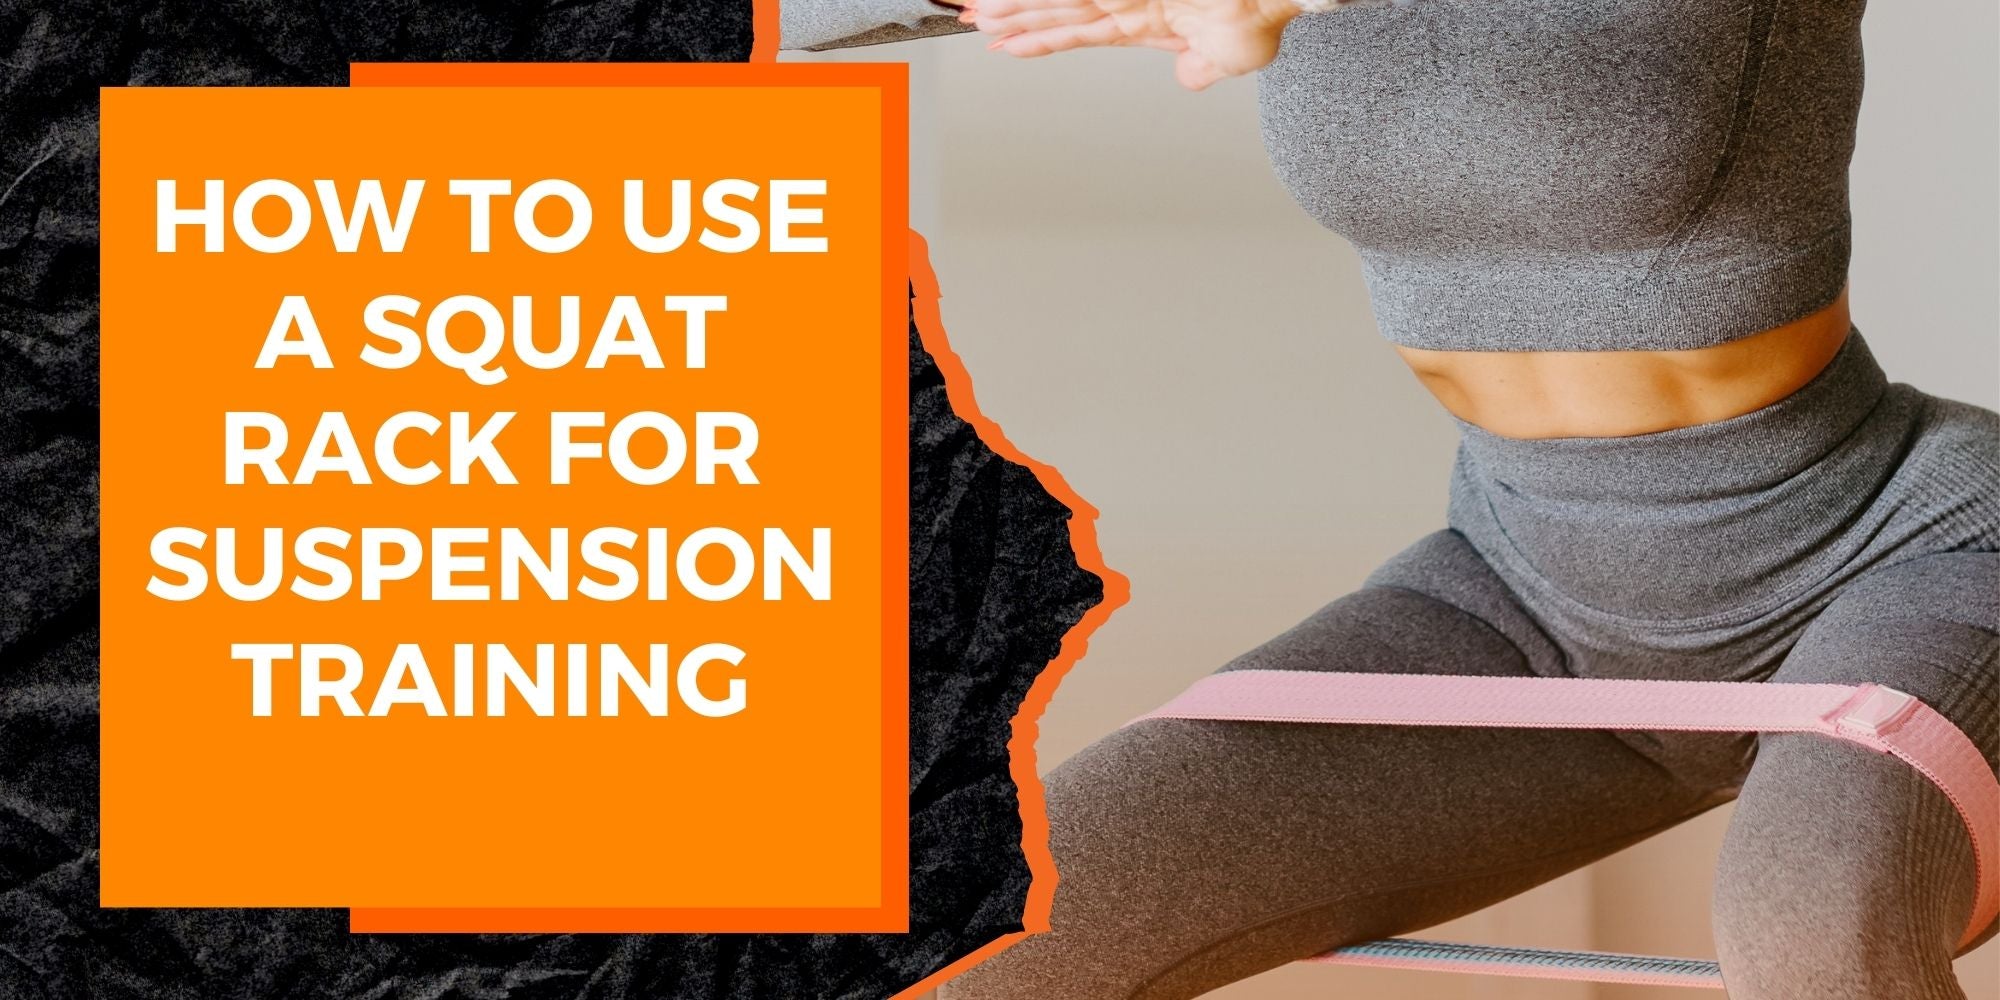 How to Use a Squat Rack for Suspension Training